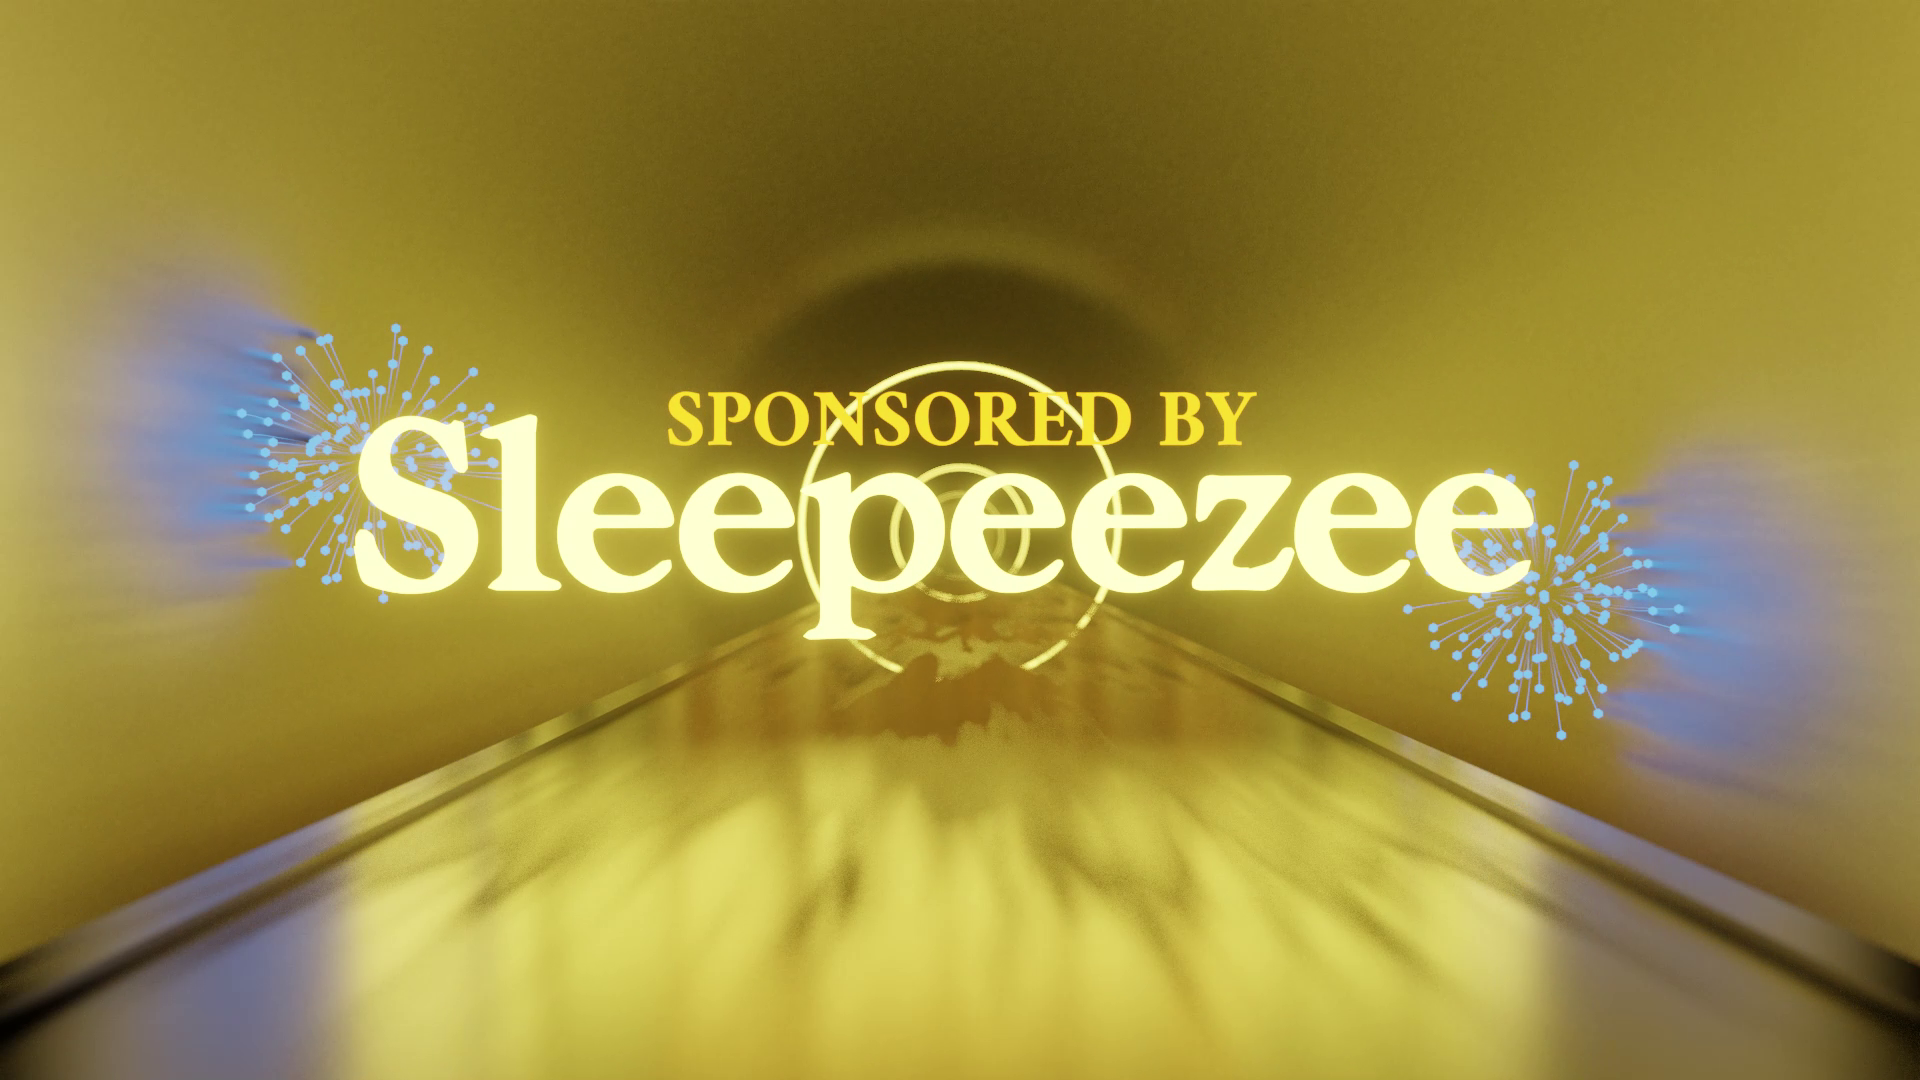 Still frame from the awards ceremony animated introduction giving the name of the sponsor, Sleepeezee